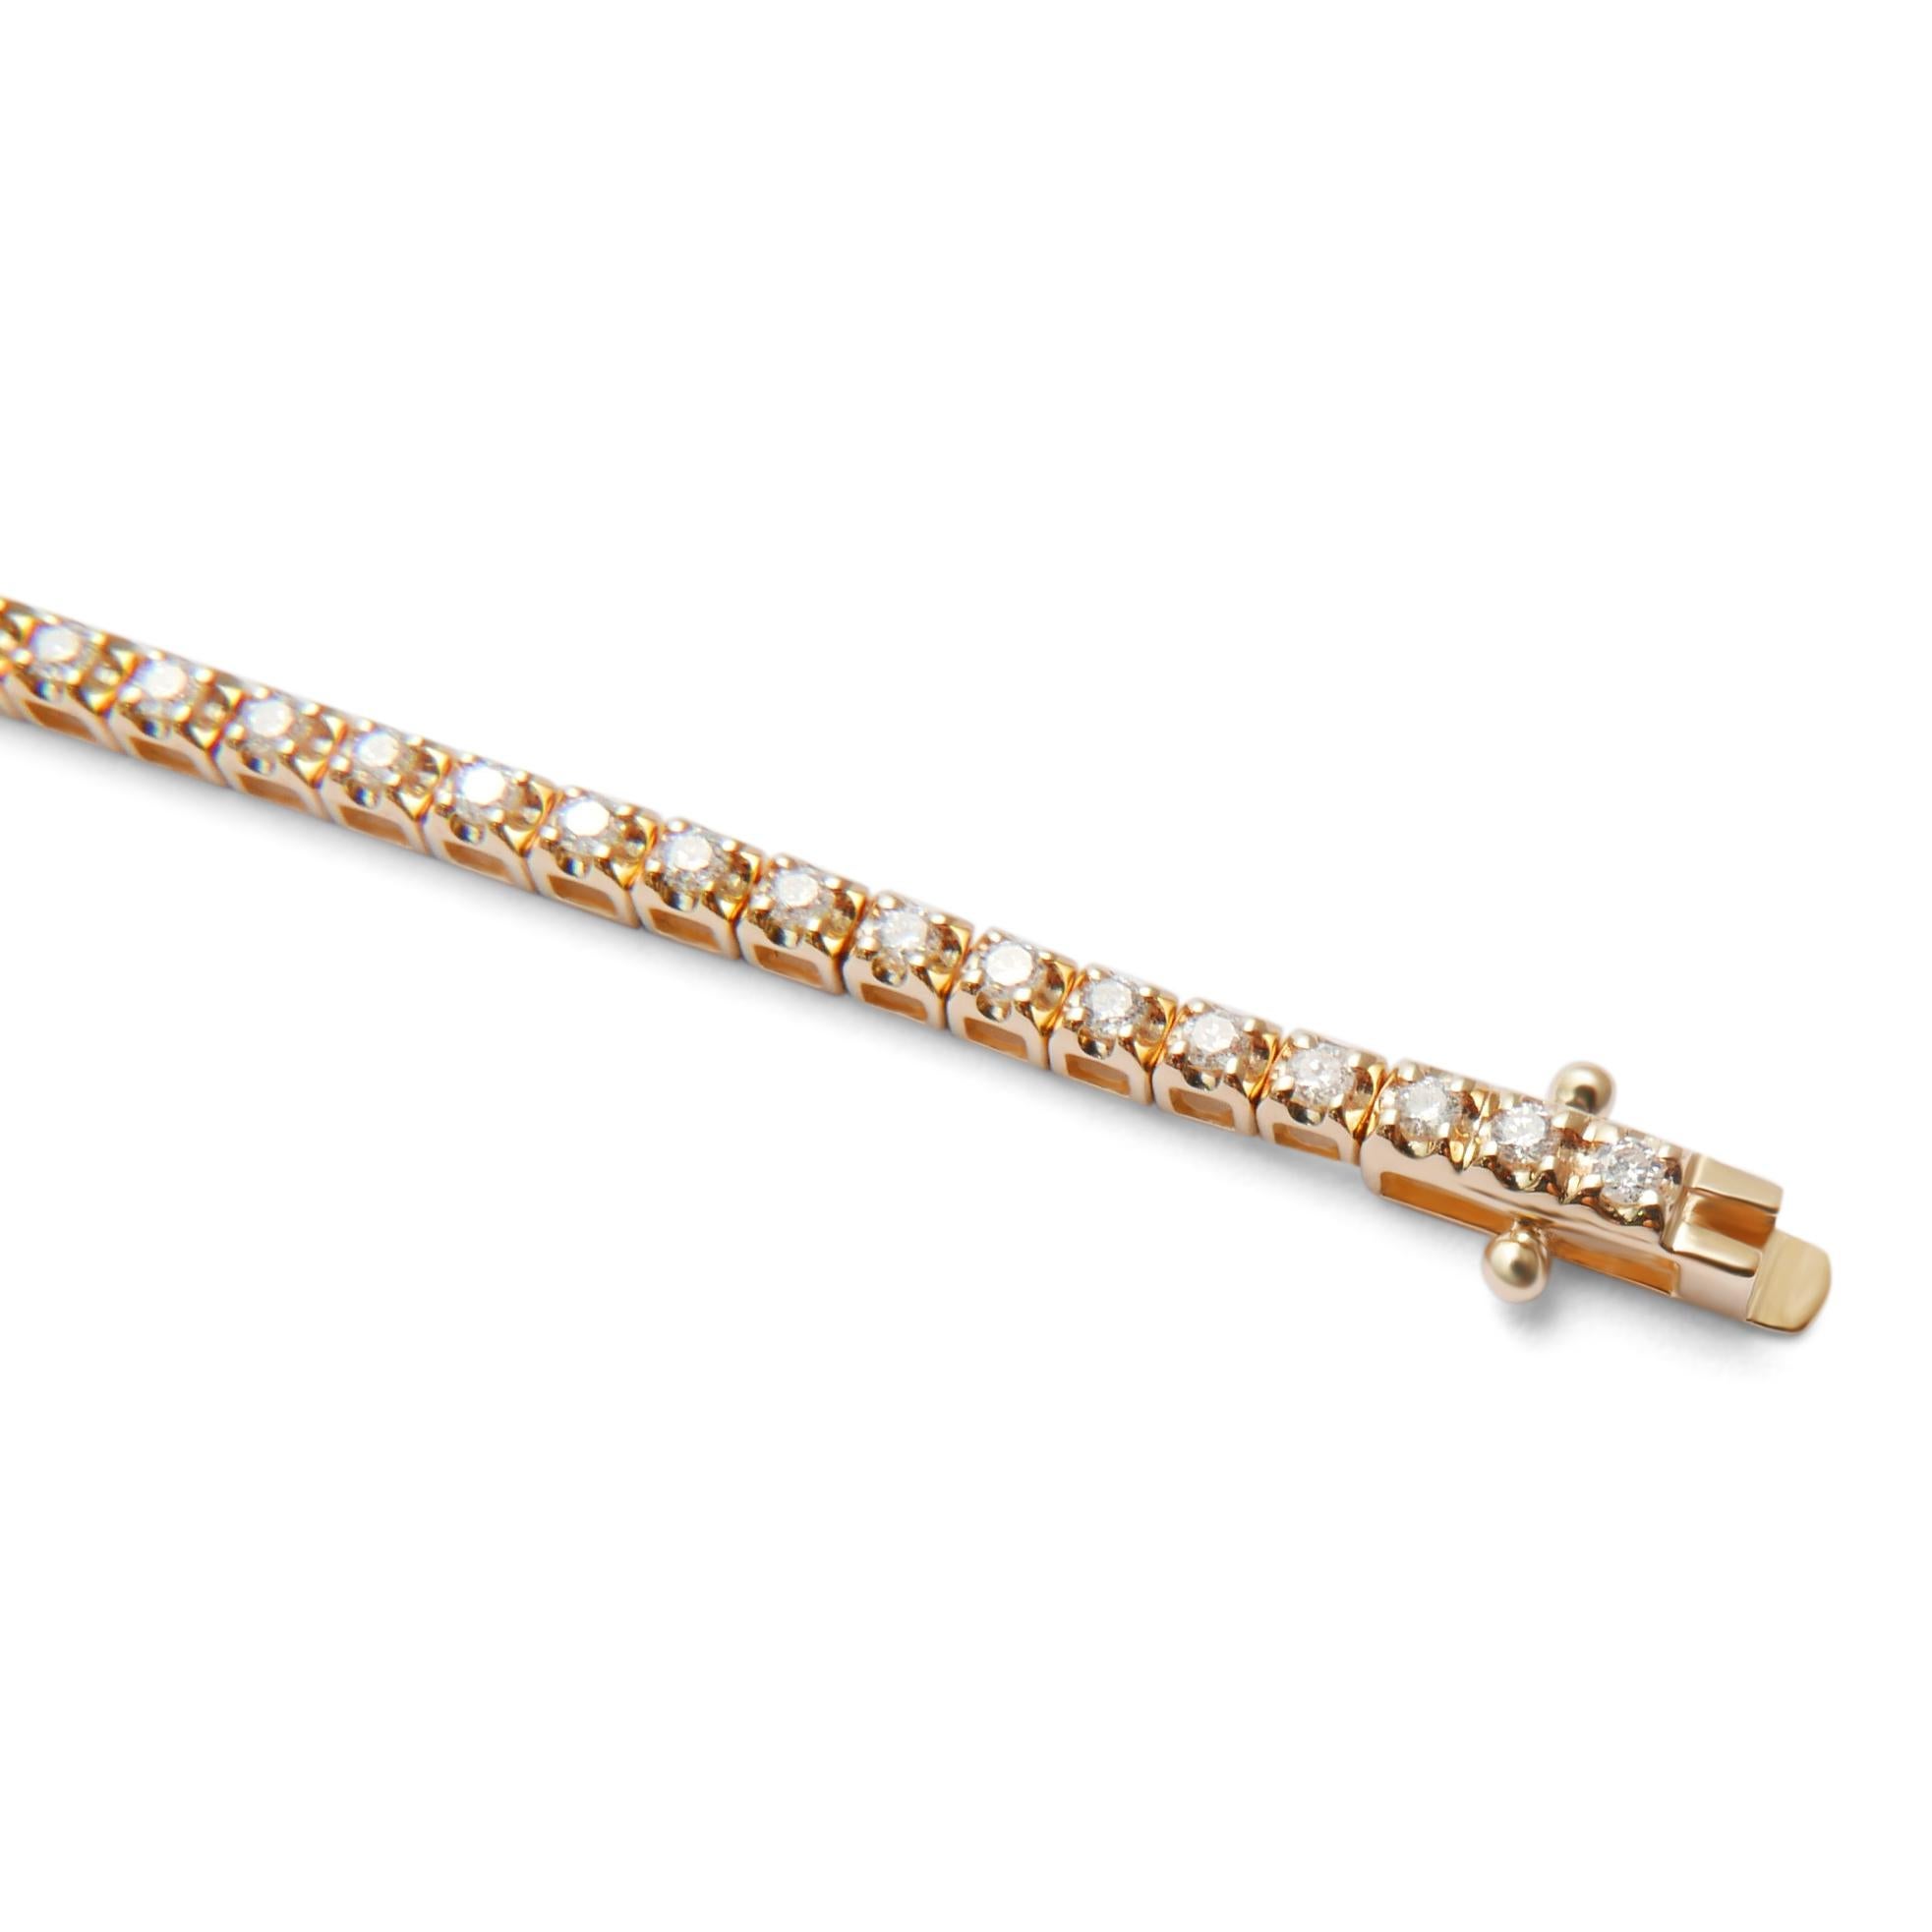 This elegant diamond tennis bracelet features 81 sparkling diamonds set in 18-karat yellow gold. A timeless classic, this piece transitions easily from day to night. The diamonds are  set into a 4-prong setting for maximum sparkle.  Bracelet is 7.25